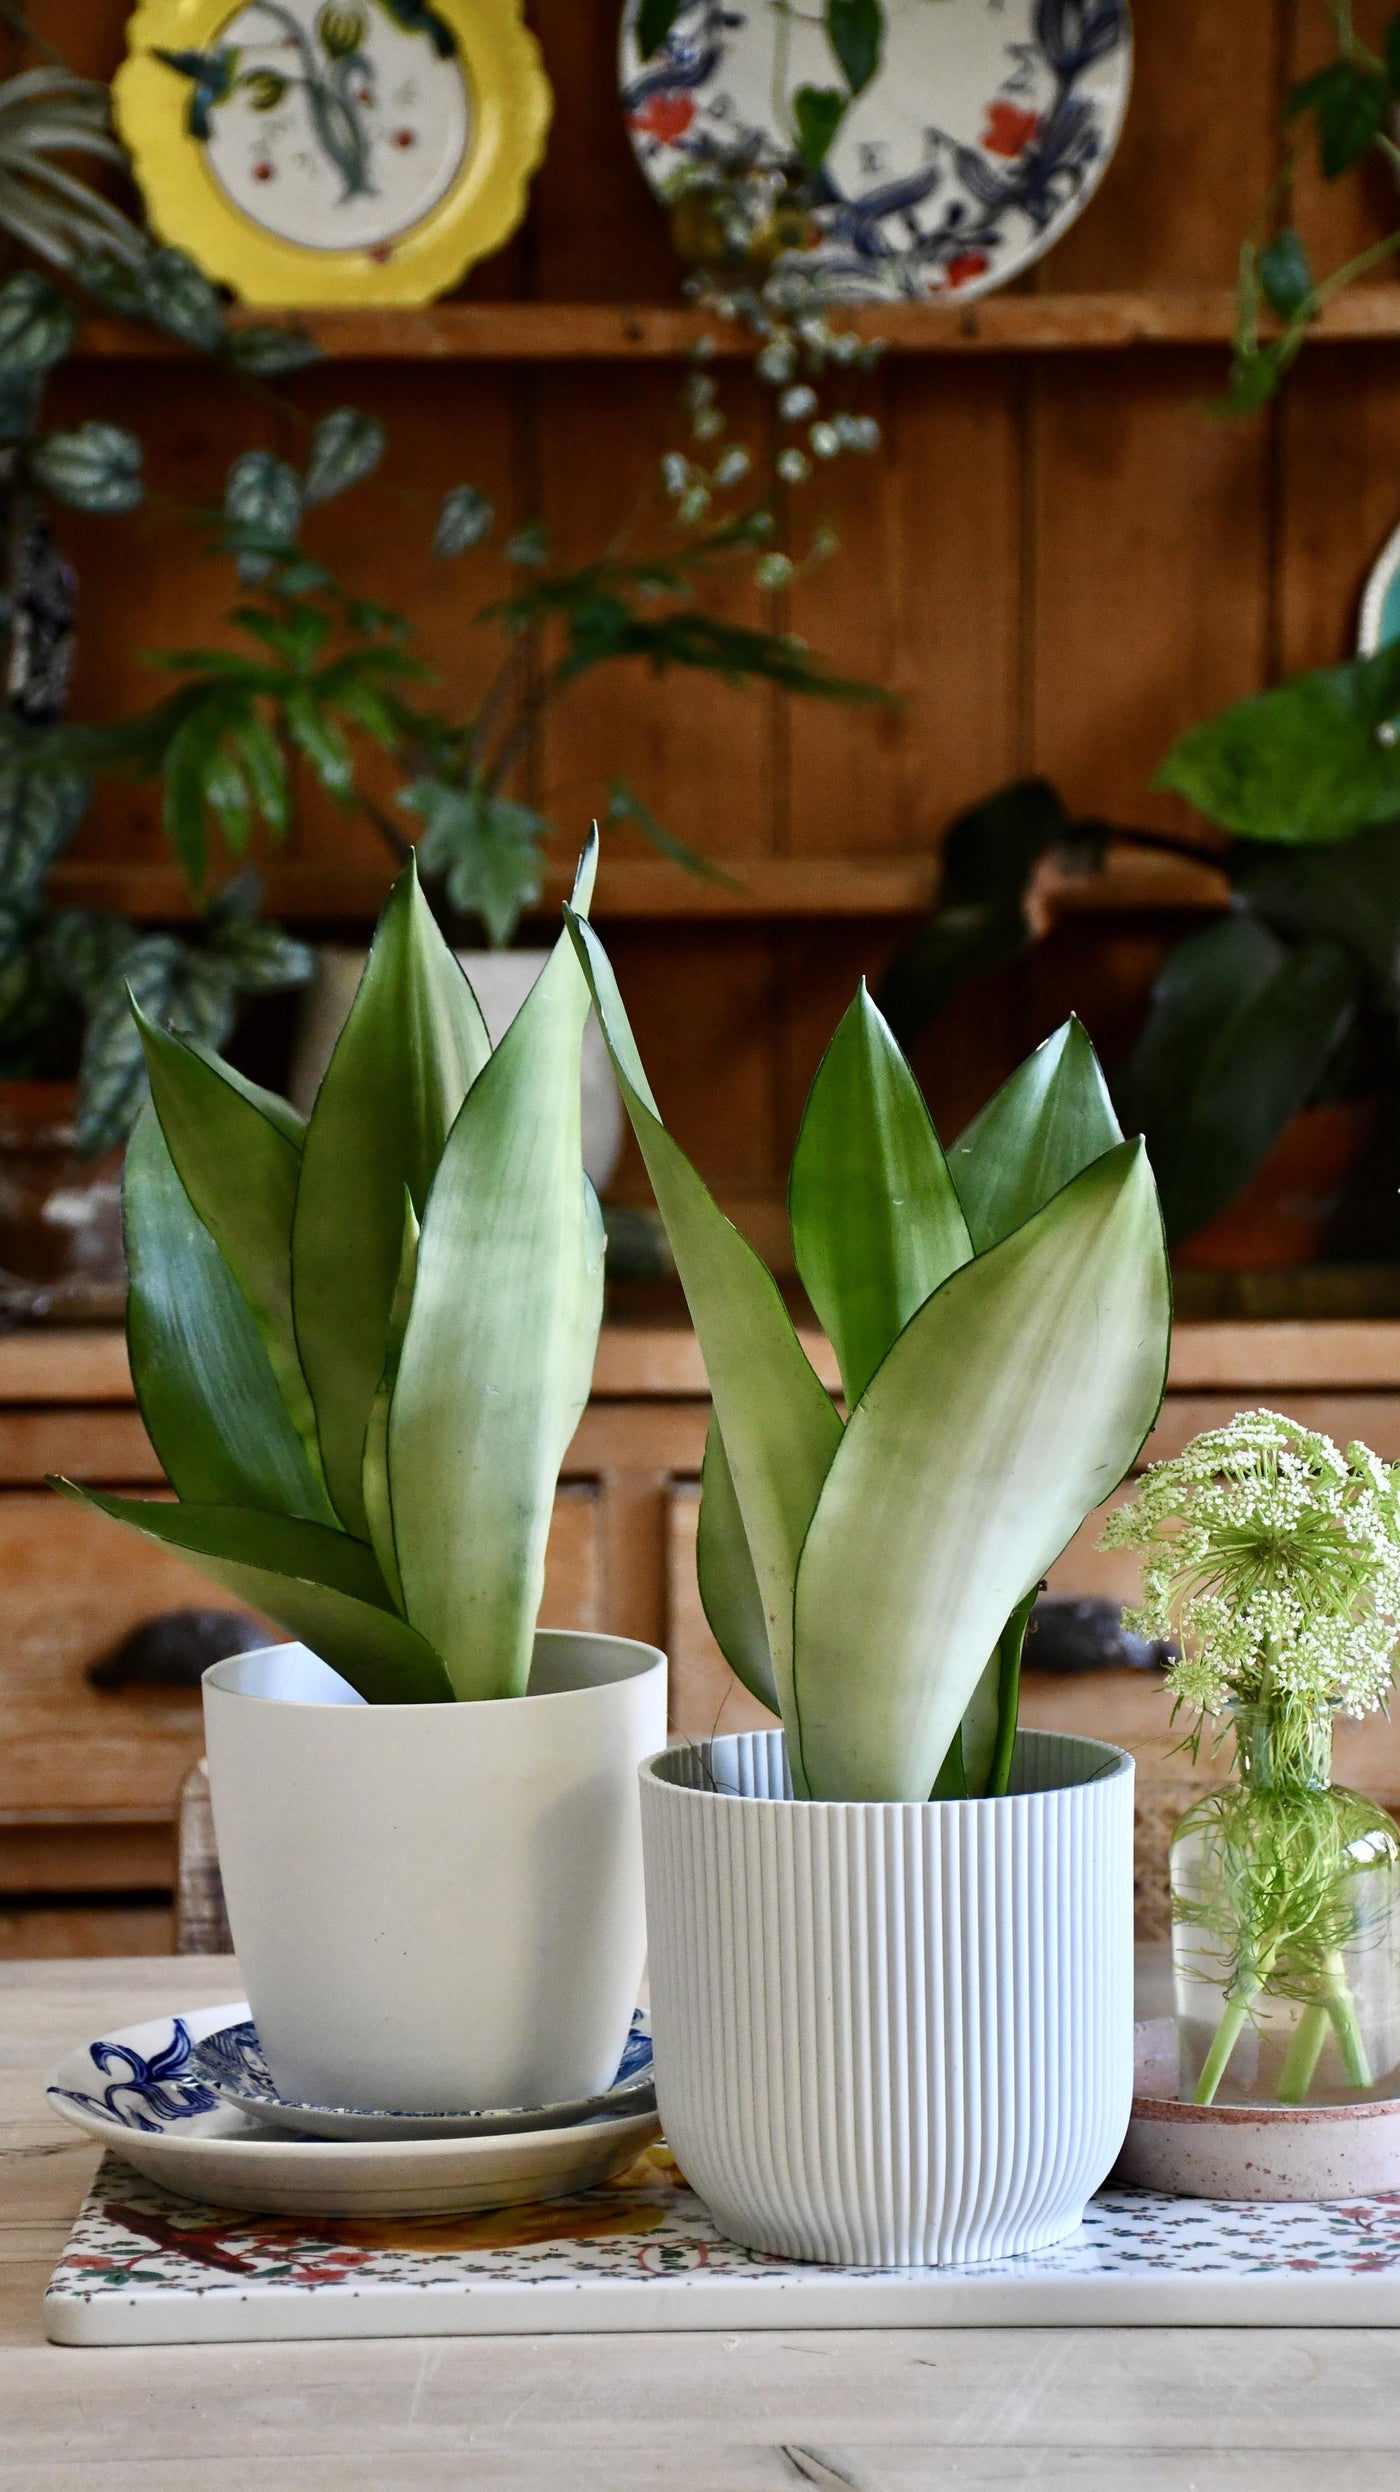 Sansevieria Trifasciata 'Moonshine’ | Mother-in-Law's Tongue